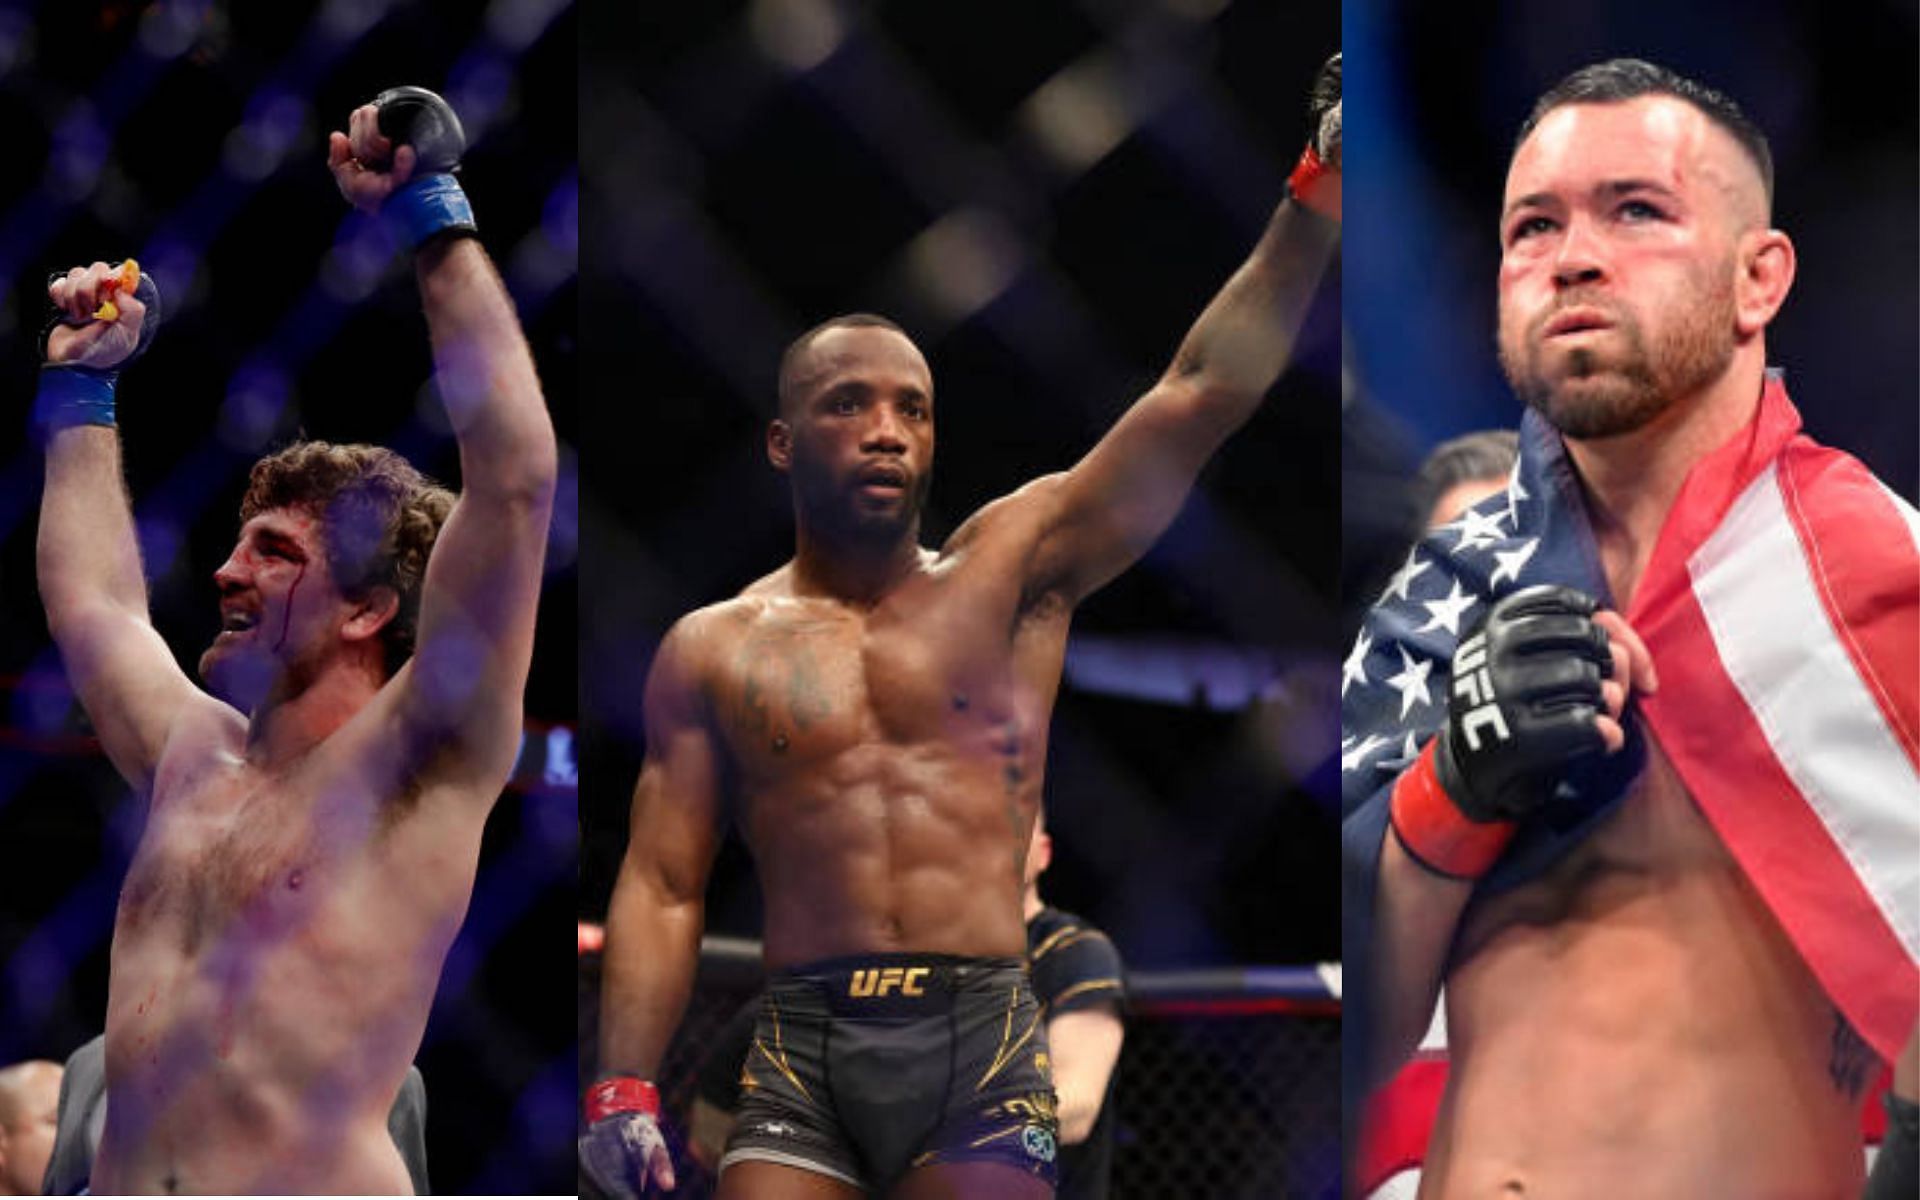 From left to right: Ben Askren, Leon Edwards, and Colby Covington